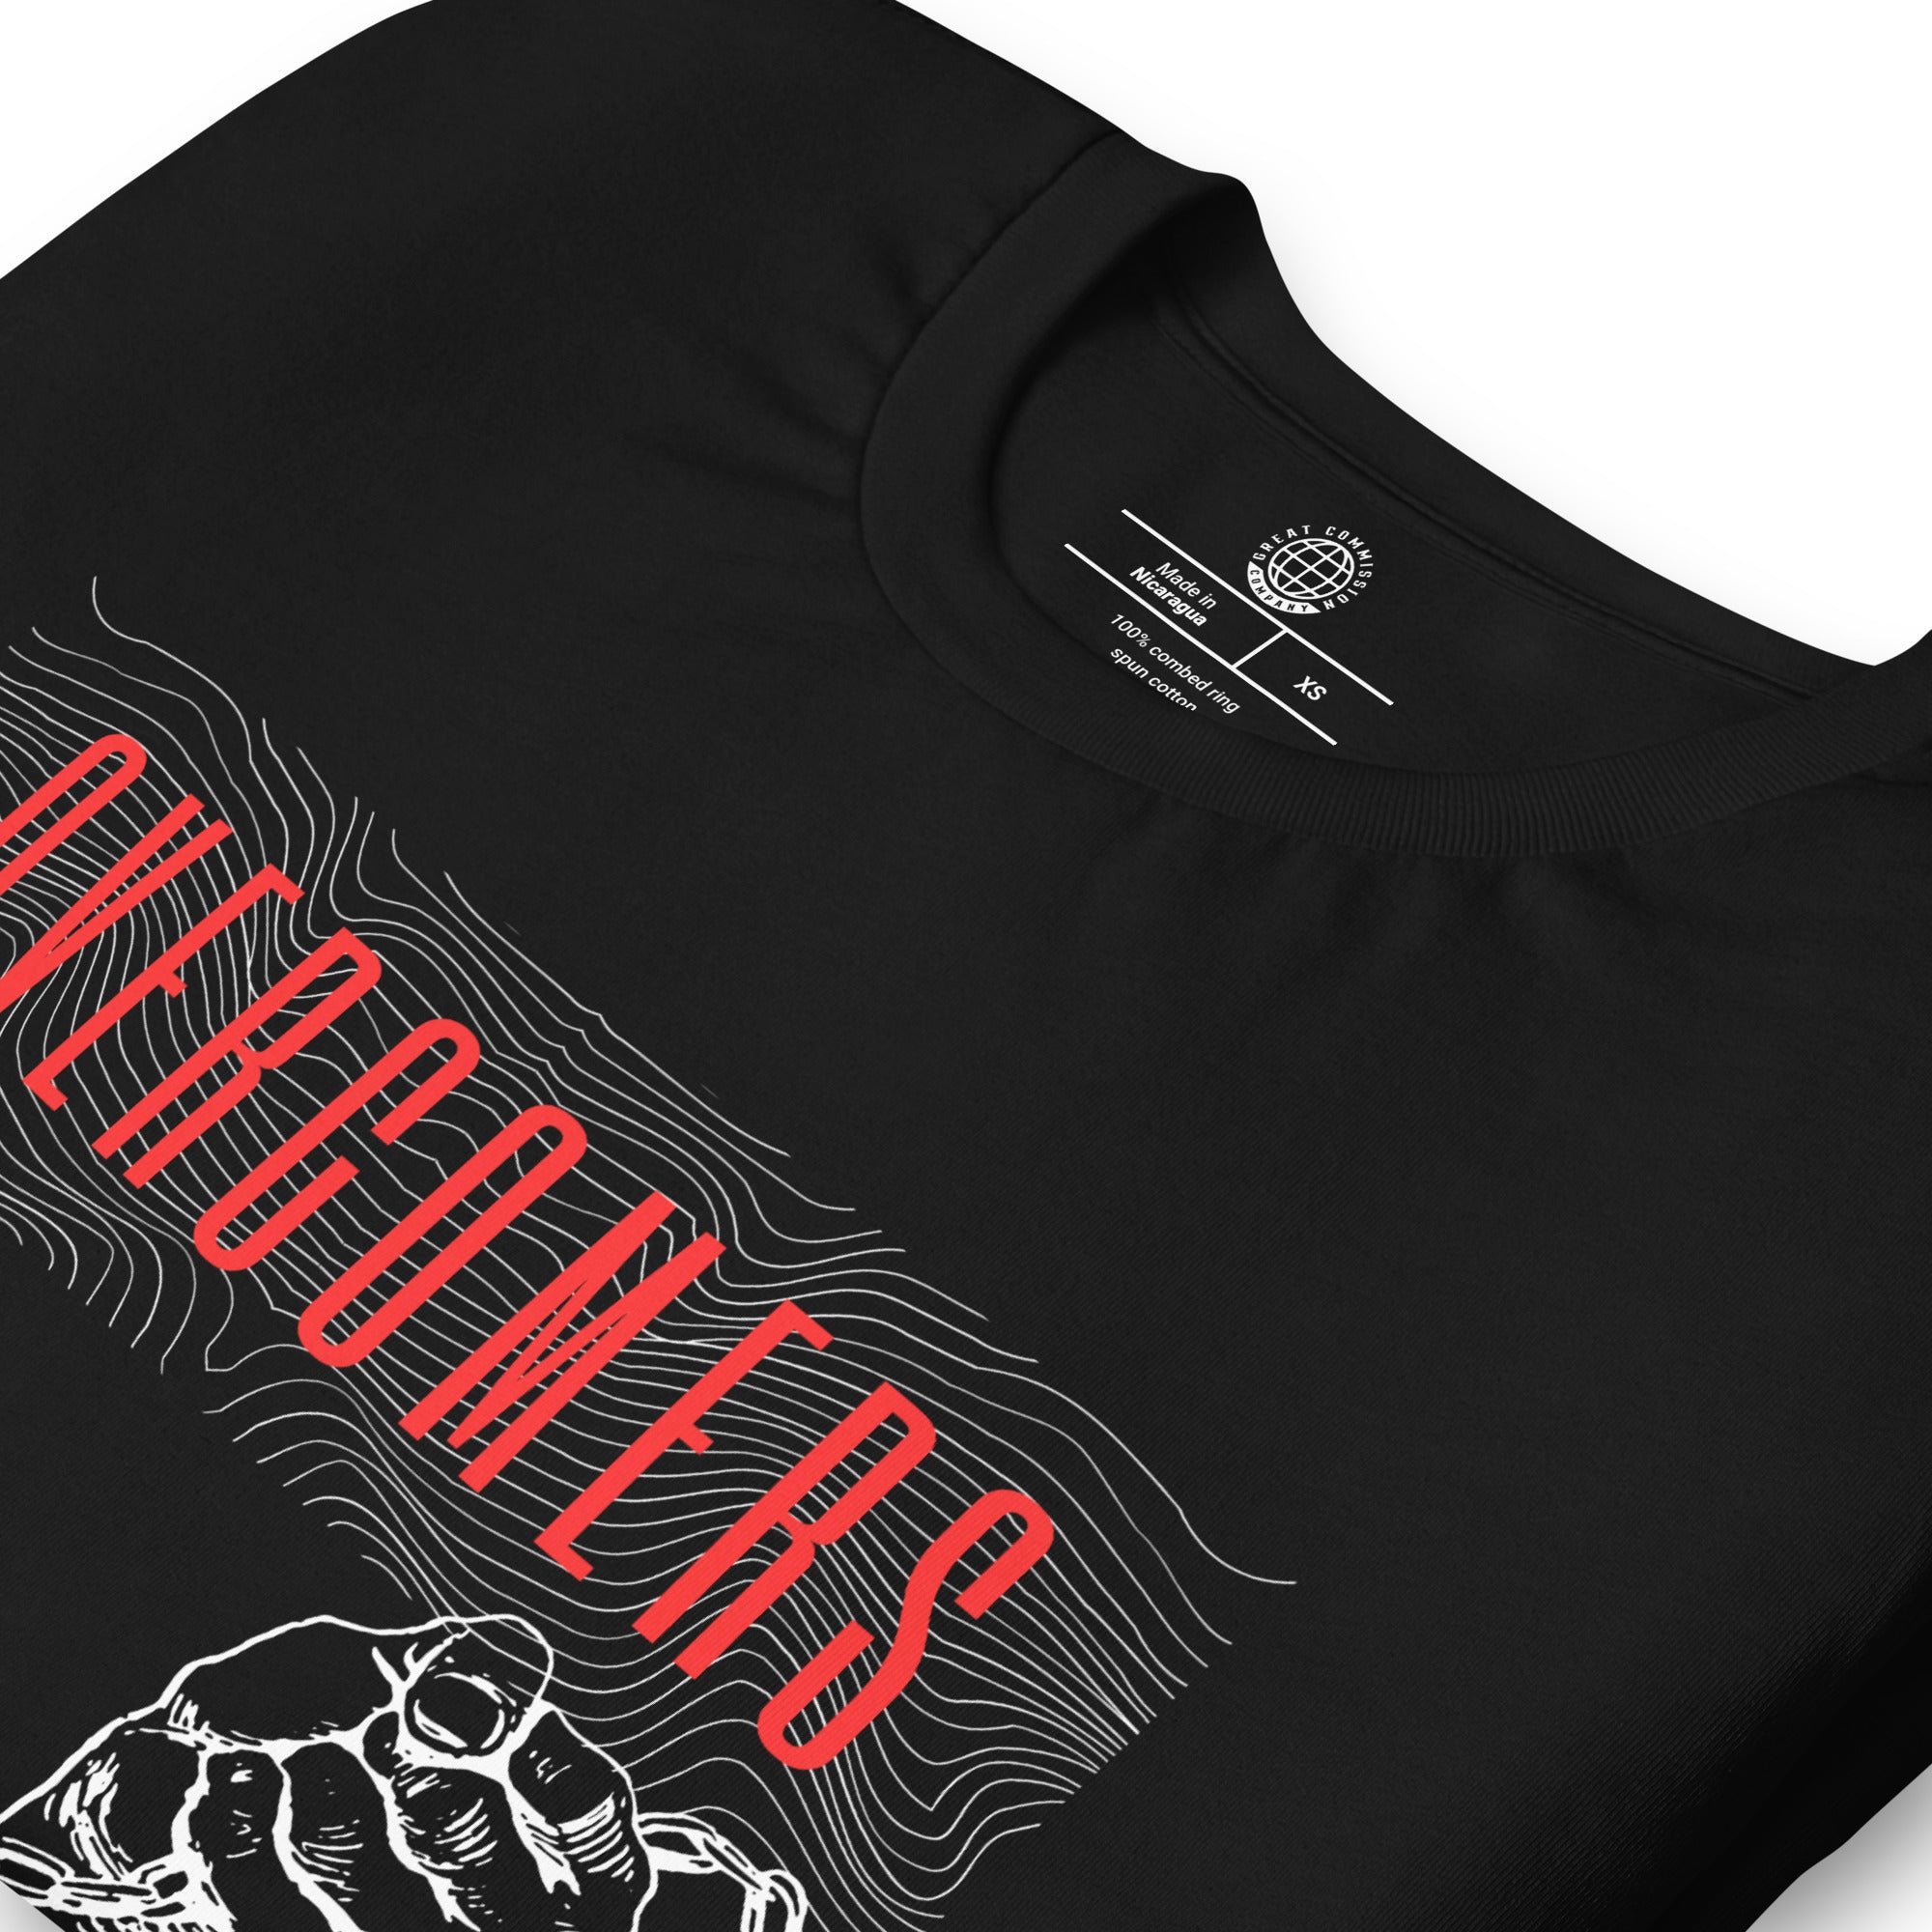 Overcomers Red Broken Chains T-Shirt - Black - Close up